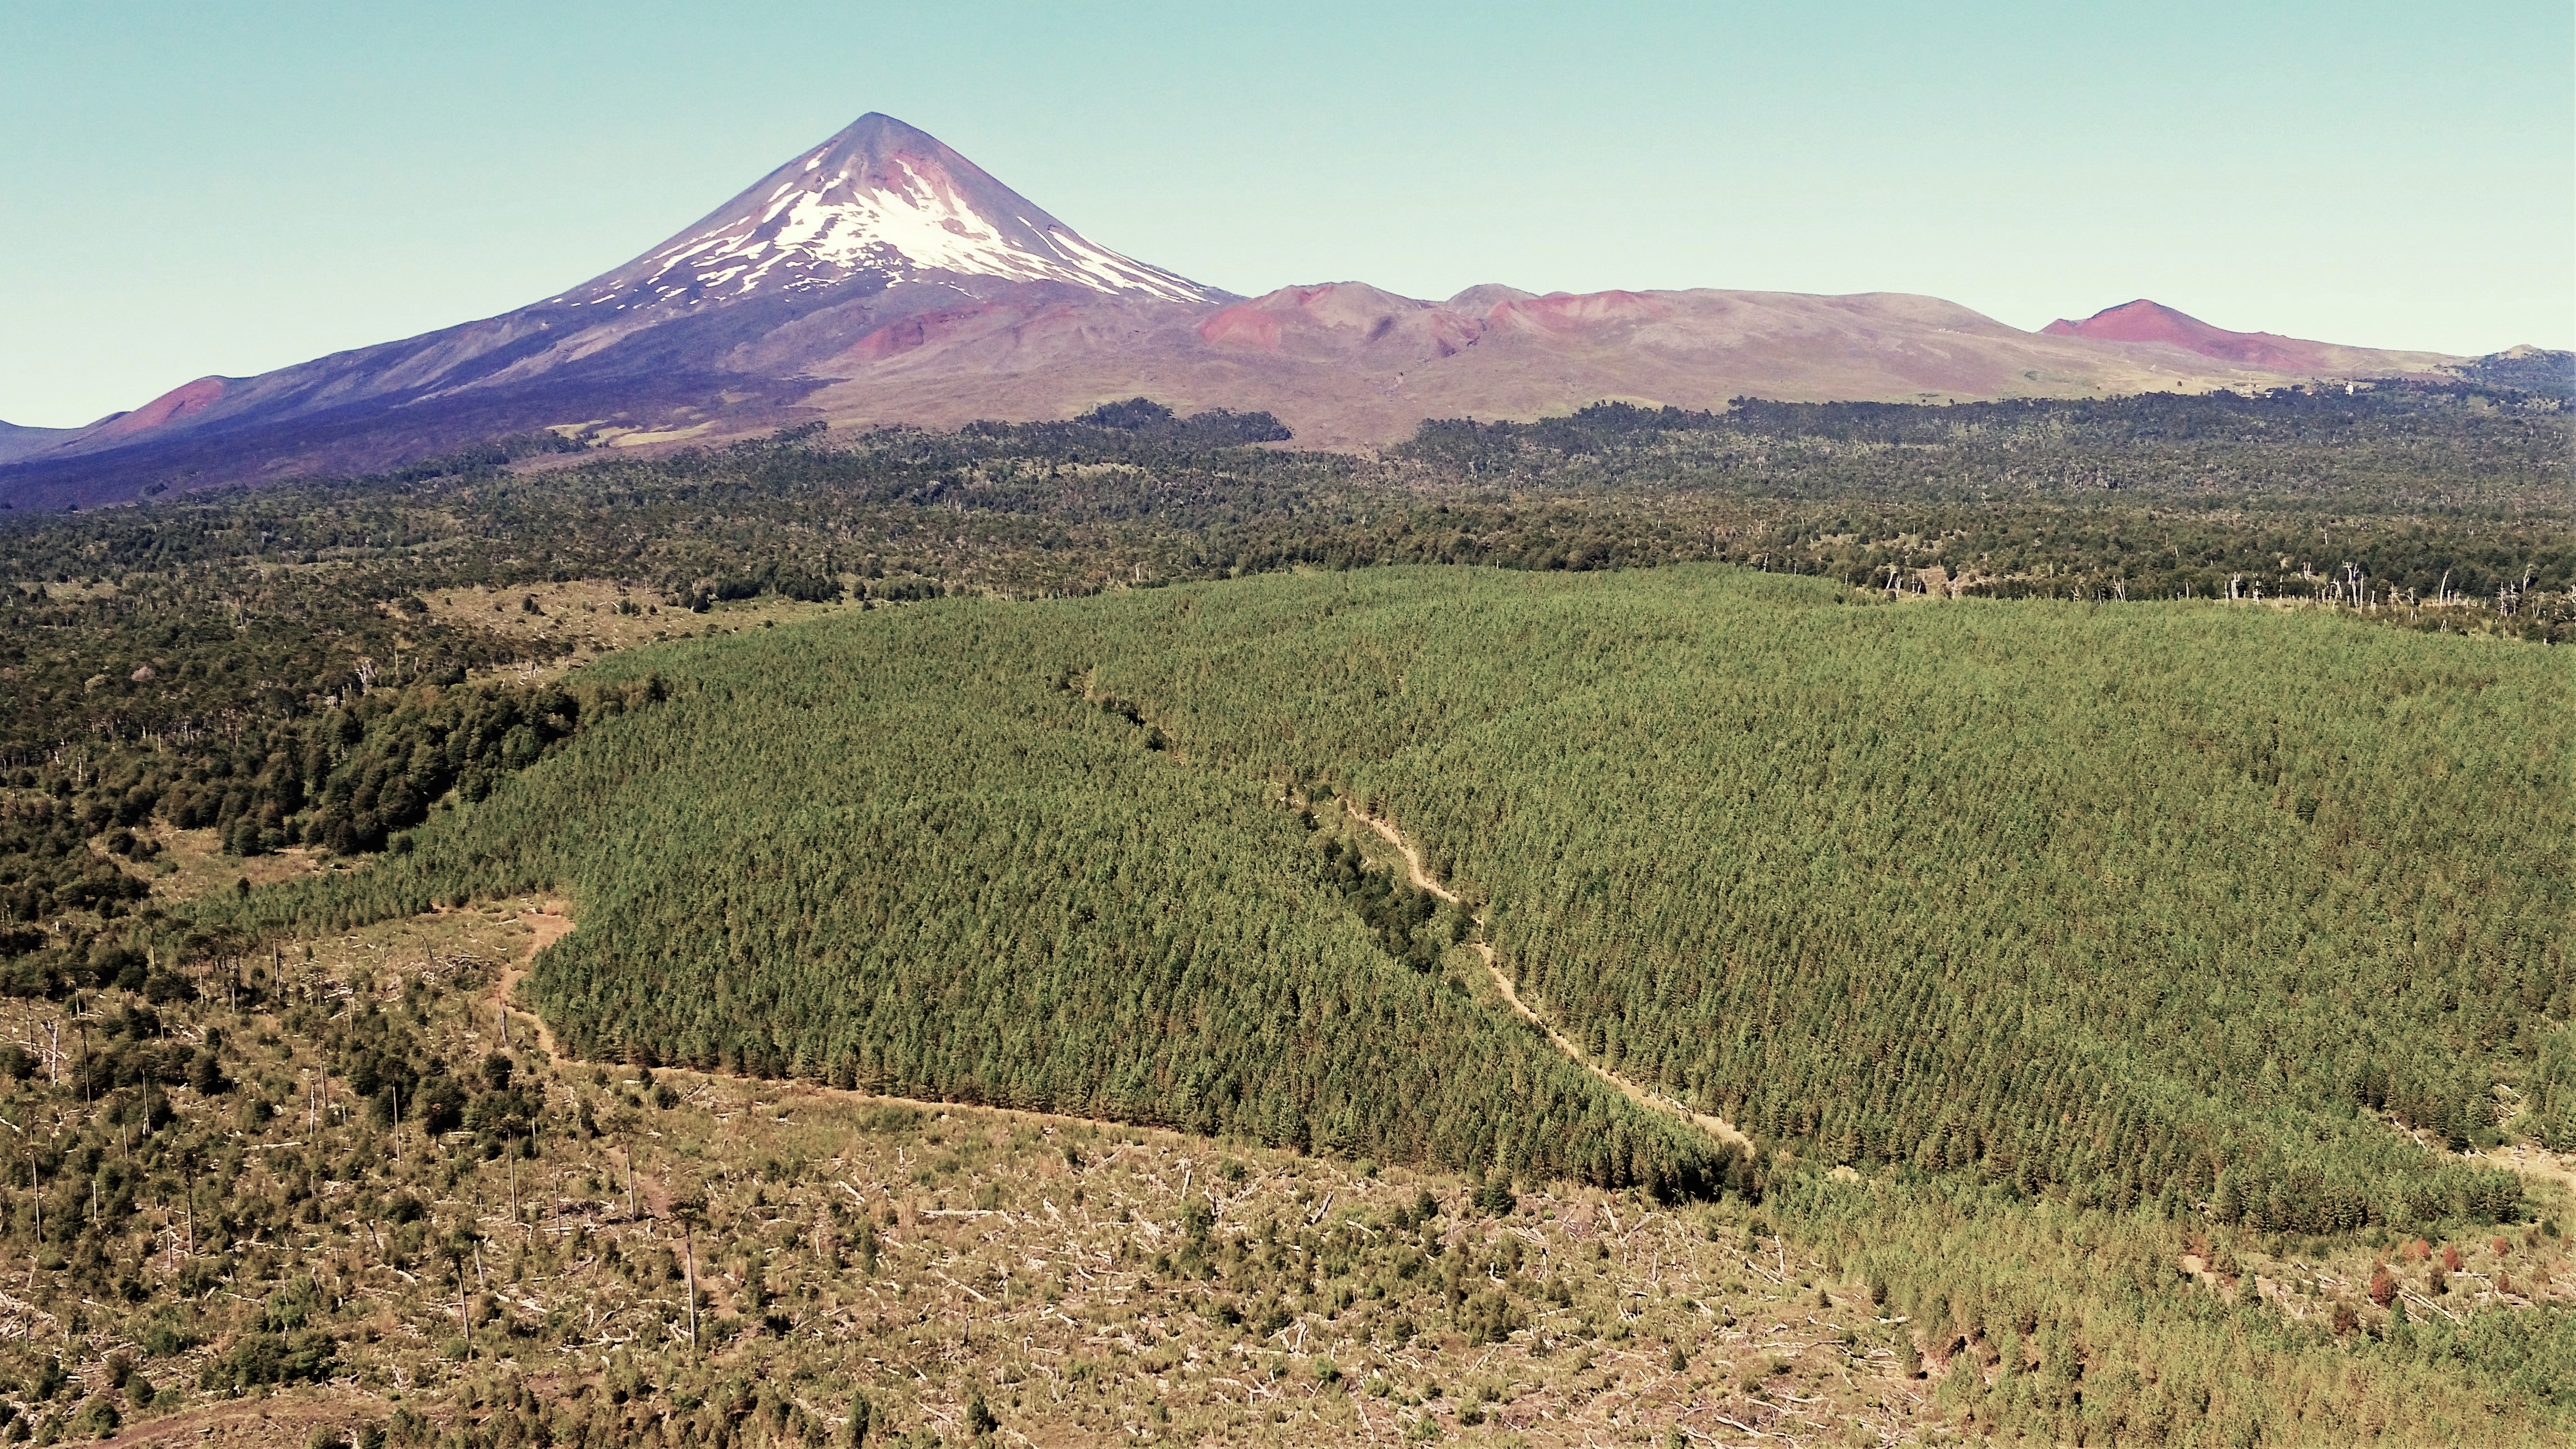 Fundo Araucarias - Forestry And Tourism Potential - Temuco / Chillan